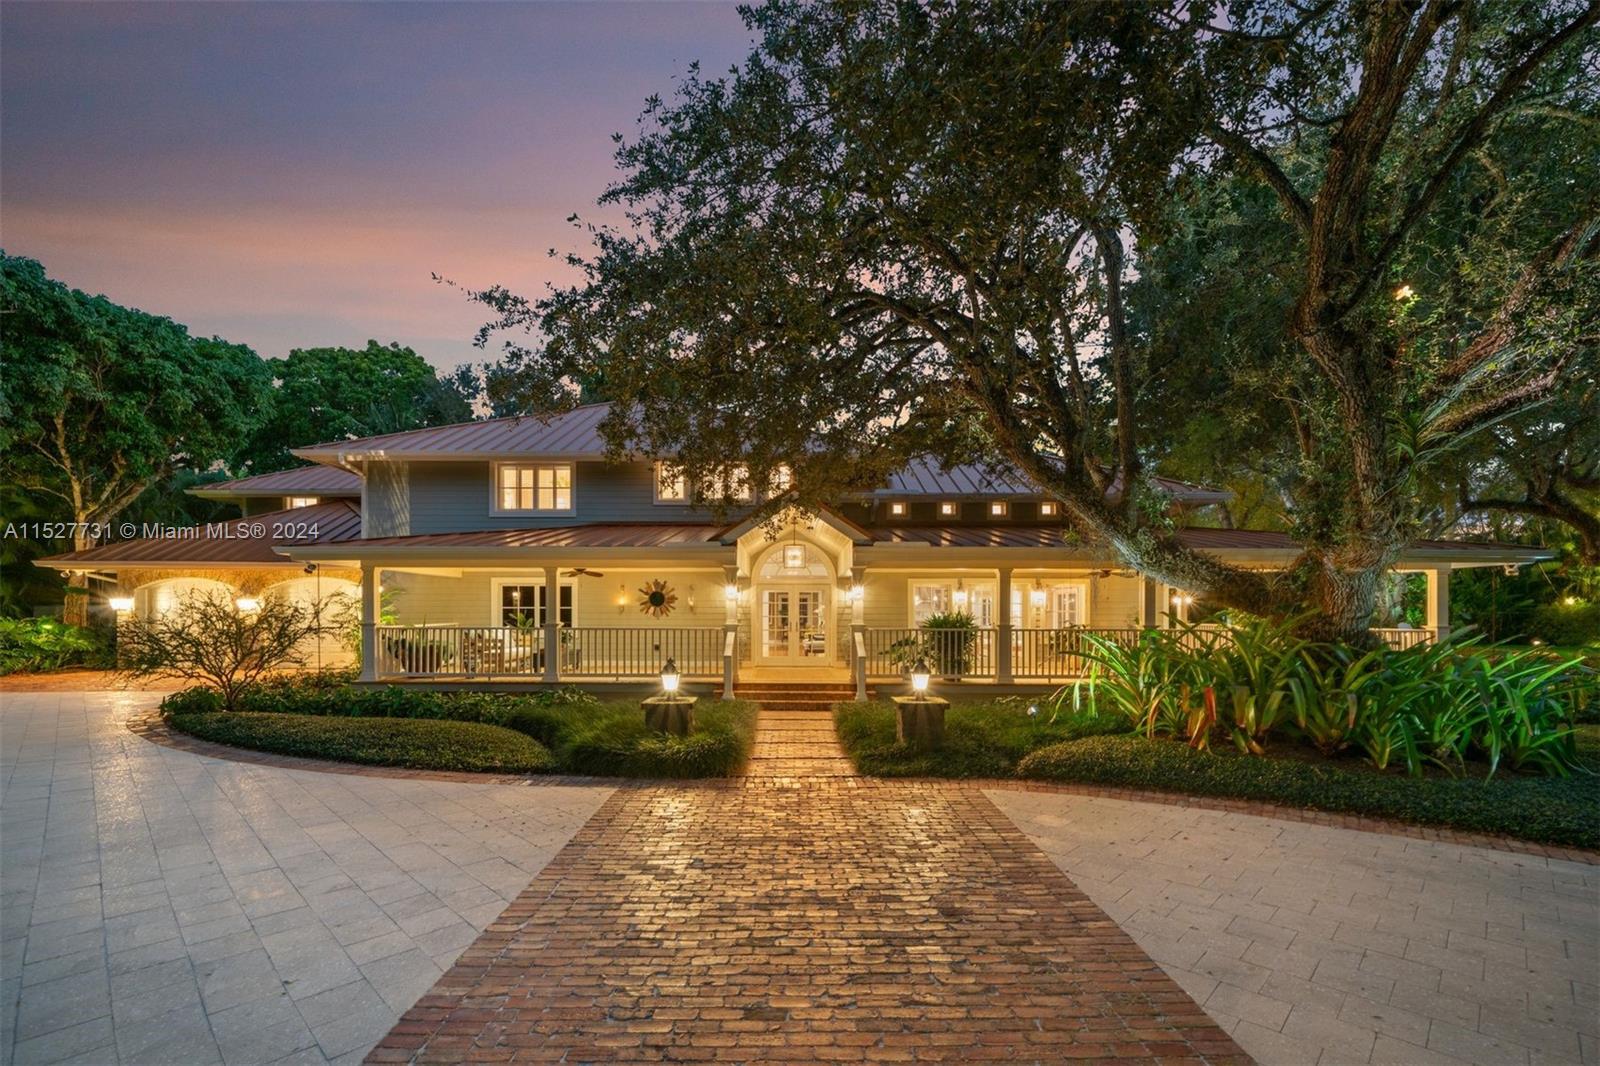 Located in the guard-gated Banyan Lakes neighborhood, this 2003 custom Old Florida estate-style home w/ wraparound porches spans 8,765 SF &amp; is the epitome of sophisticated living.  Situated on a 50,000+ sf lot that is nothing short of magical w/ live oaks, terraced lawn, &amp; lush landscaping around the lagoon-style pool &amp; patio. The 6 BR, 5.2 BA home w/ floorplan that calls for entertaining features a formal liv rm that opens to a zen garden &amp; family rm w/ custom built-ins &amp; fireplace. The bespoke kitchen incl Caesarstone counters, Wolfe &amp; Subzero appliances, banquette &amp; butlers pantry.  The primary ste has  large BR, gym, 2 walk-ins, &amp; spa-like BA. There are 4 add’l BRs upstairs + office. White oak floors, impact glass, 2014 metal roof, generator, 2-car gar are some of the special features.